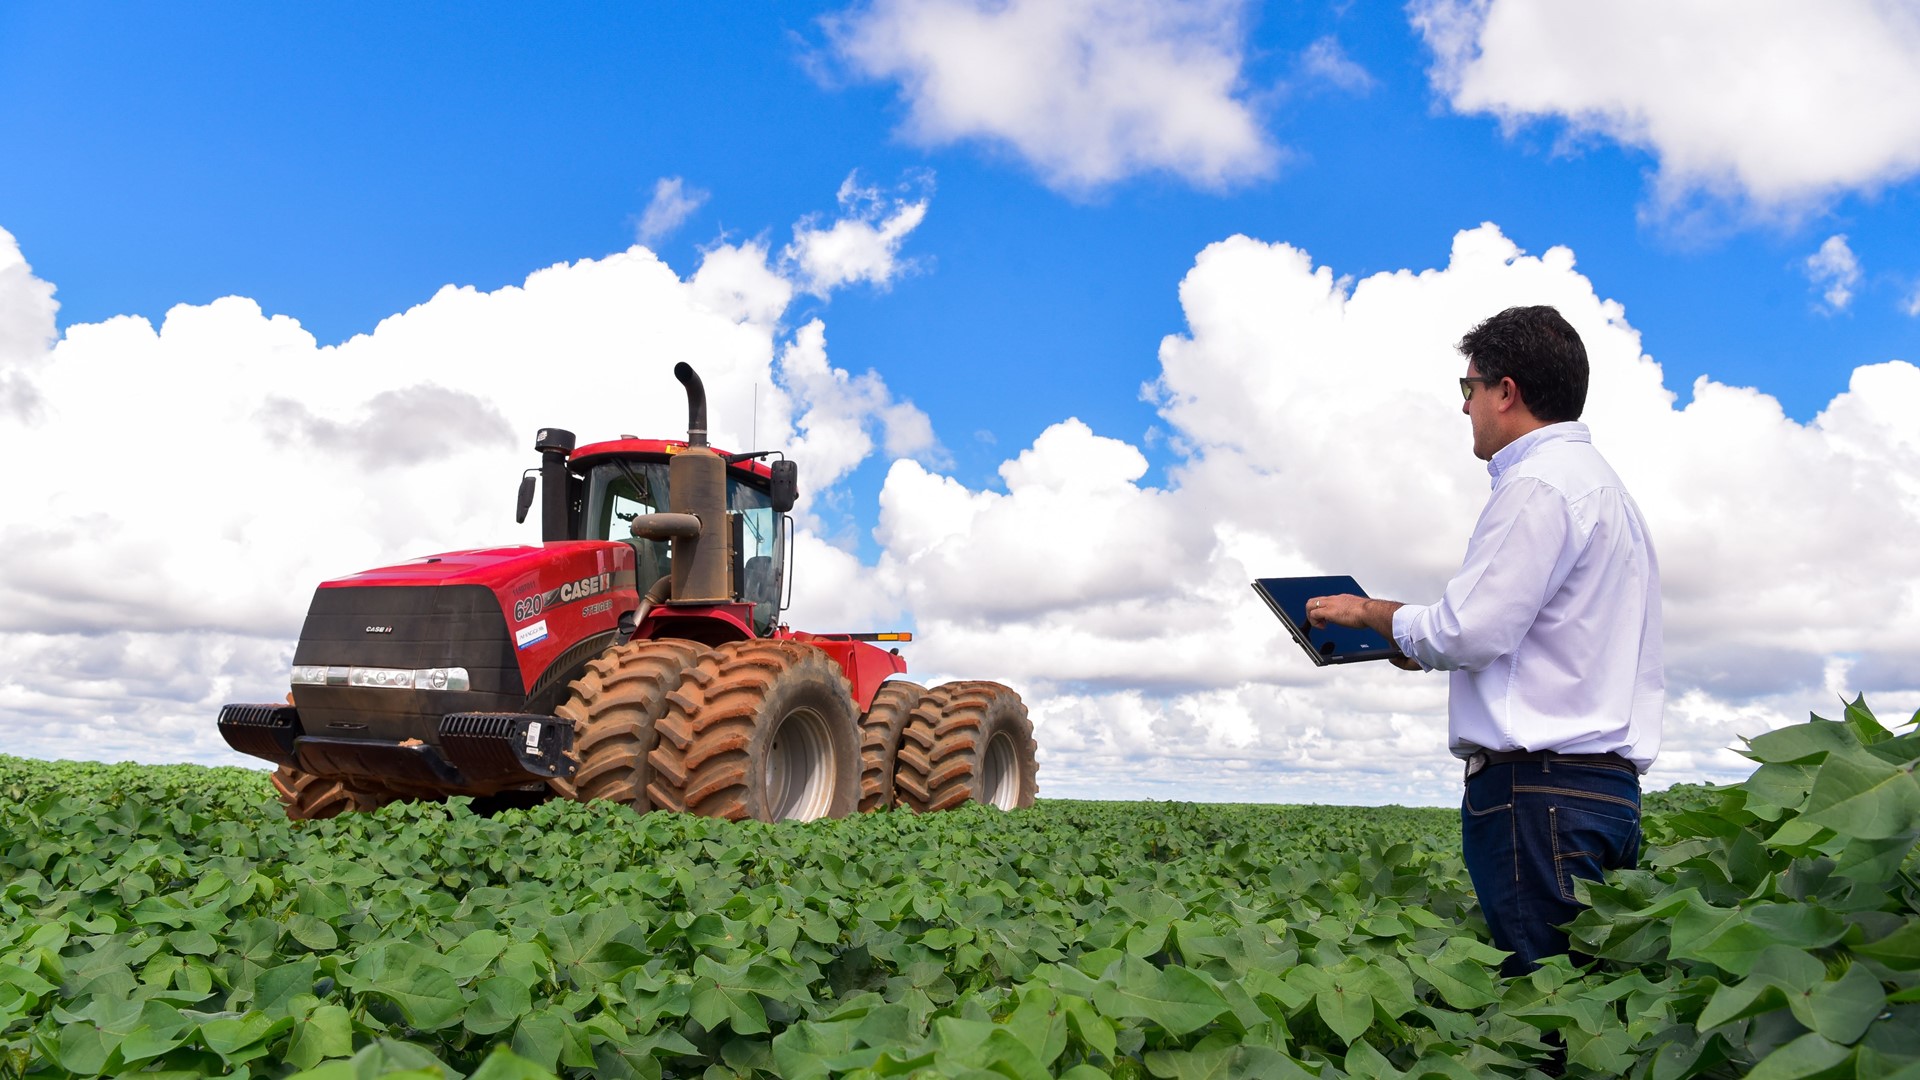 ConectarAGRO: an initiative intended to consolidate and expand internet access across Brazil’s agricultural region